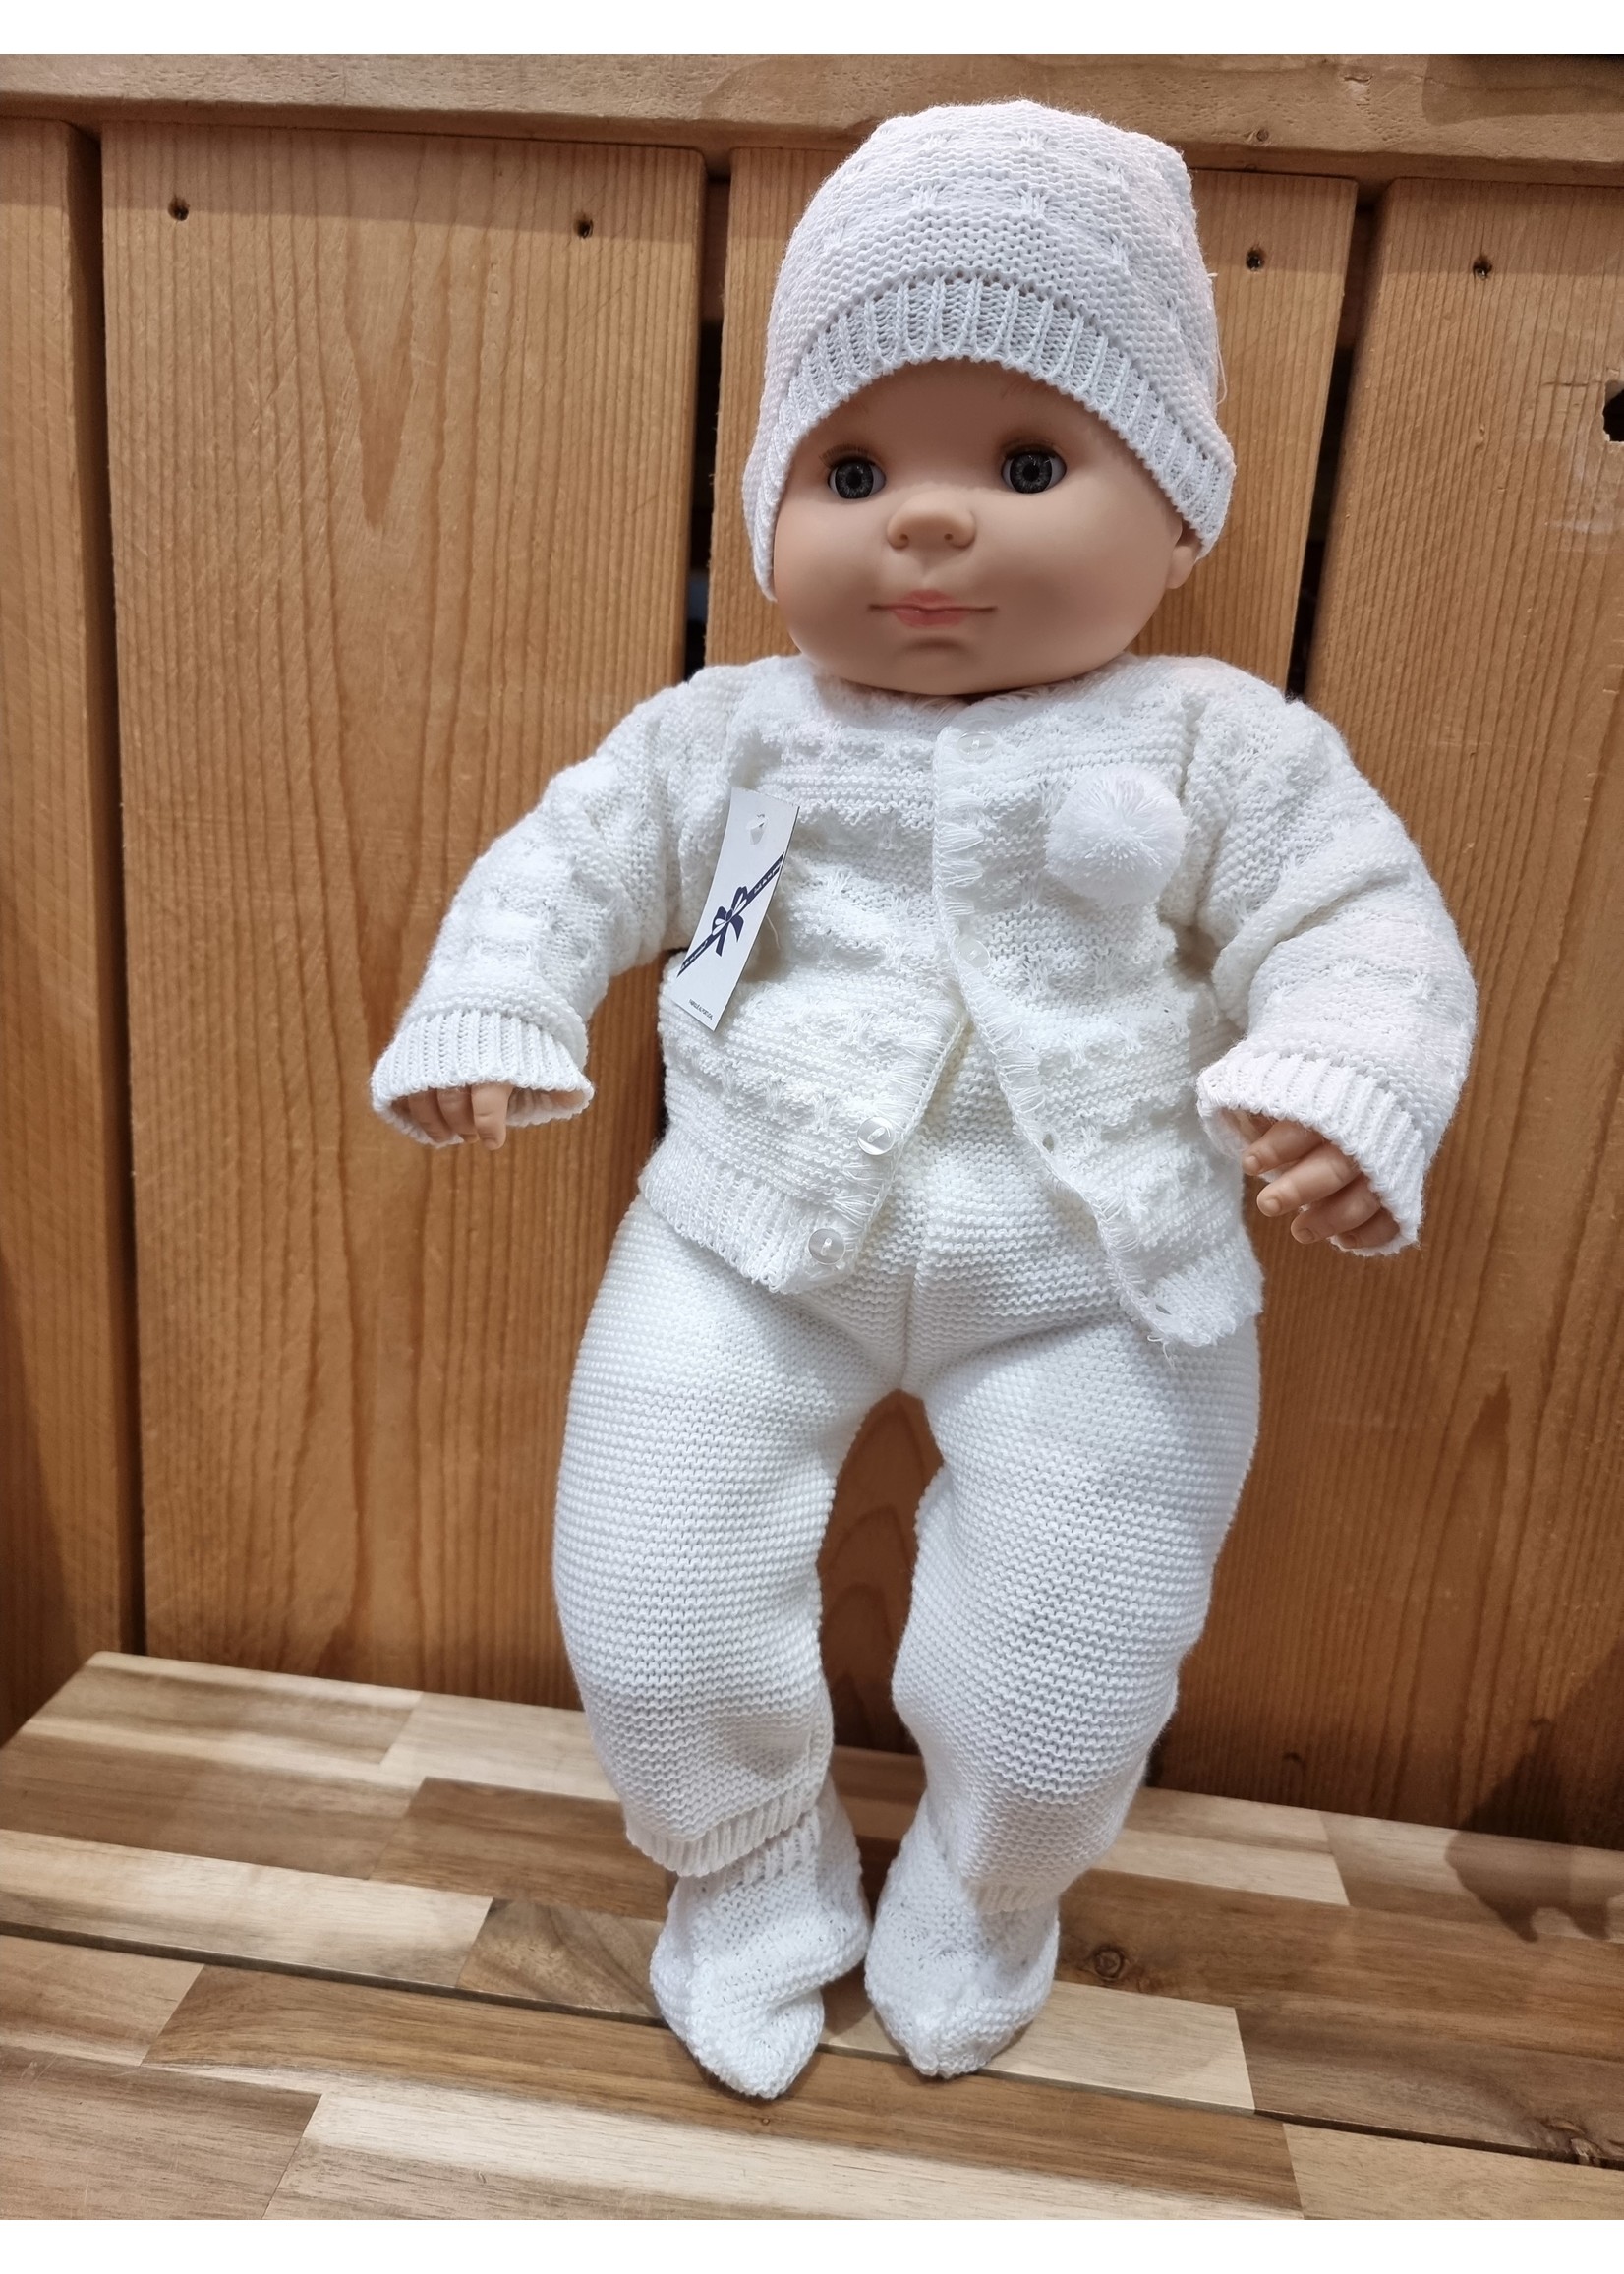 Passion Knitwear set Baby